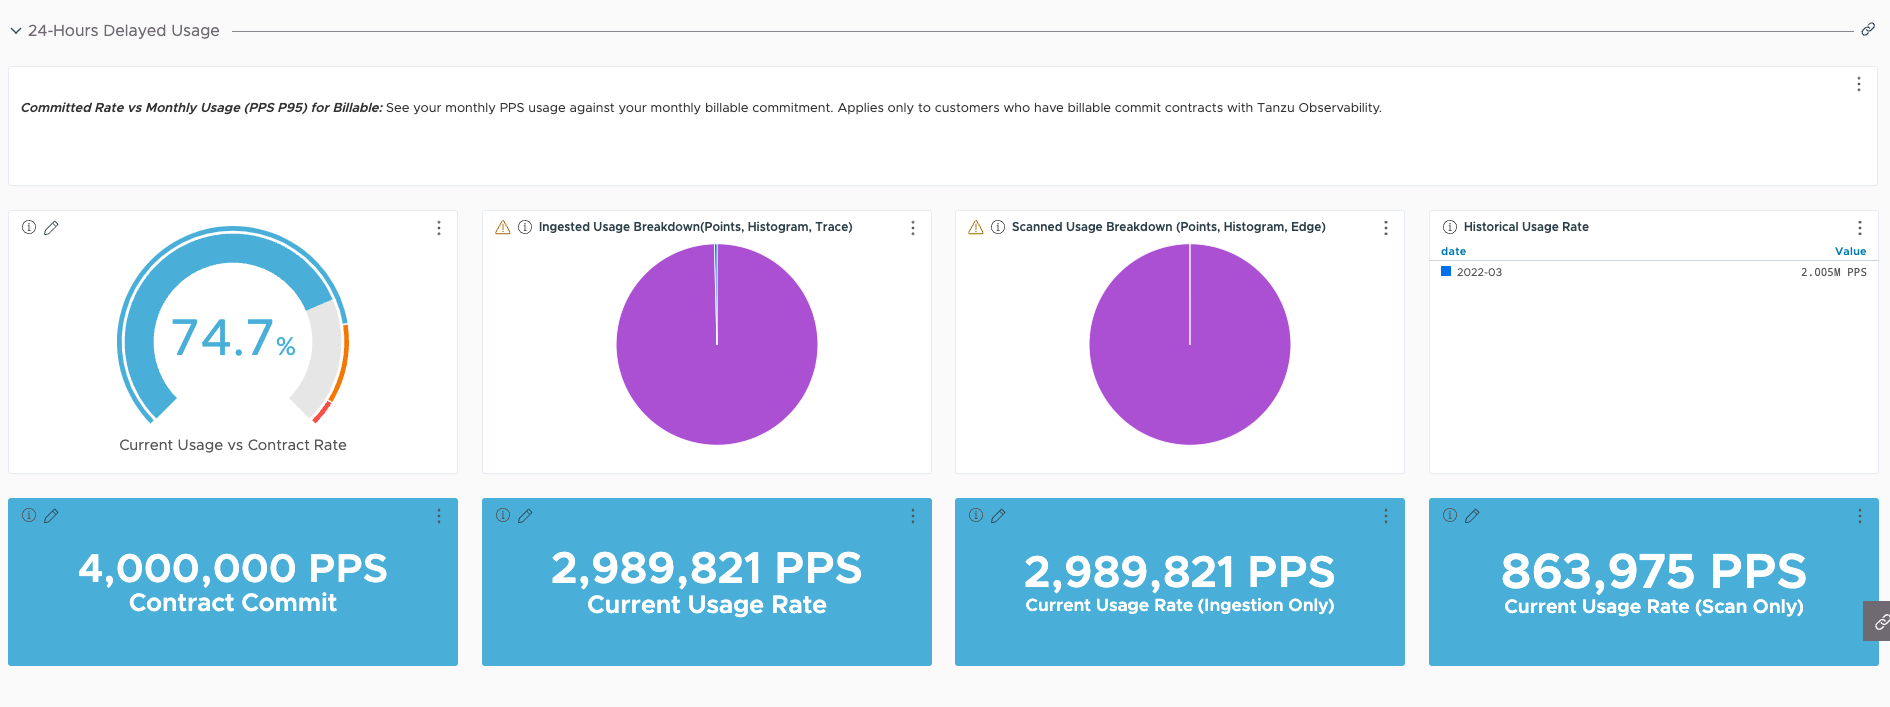 Screenshot of part of the Committed Rate vs Monthly Usage (PPS P95) for Billable dashboard